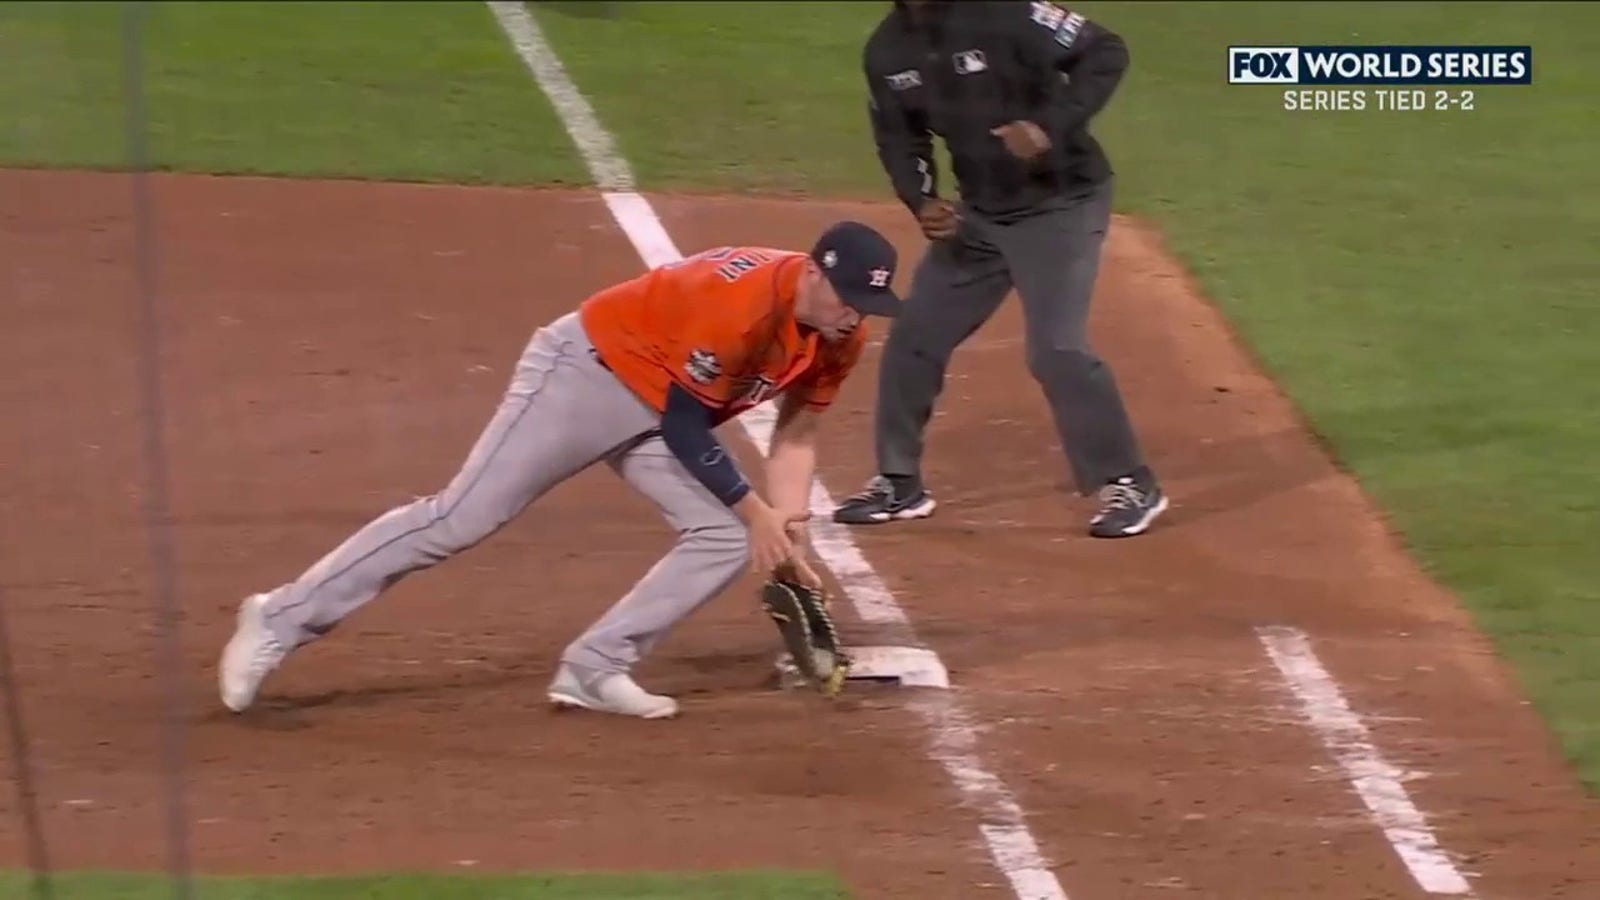 Trey Mancini makes a great play to keep the Astros ahead